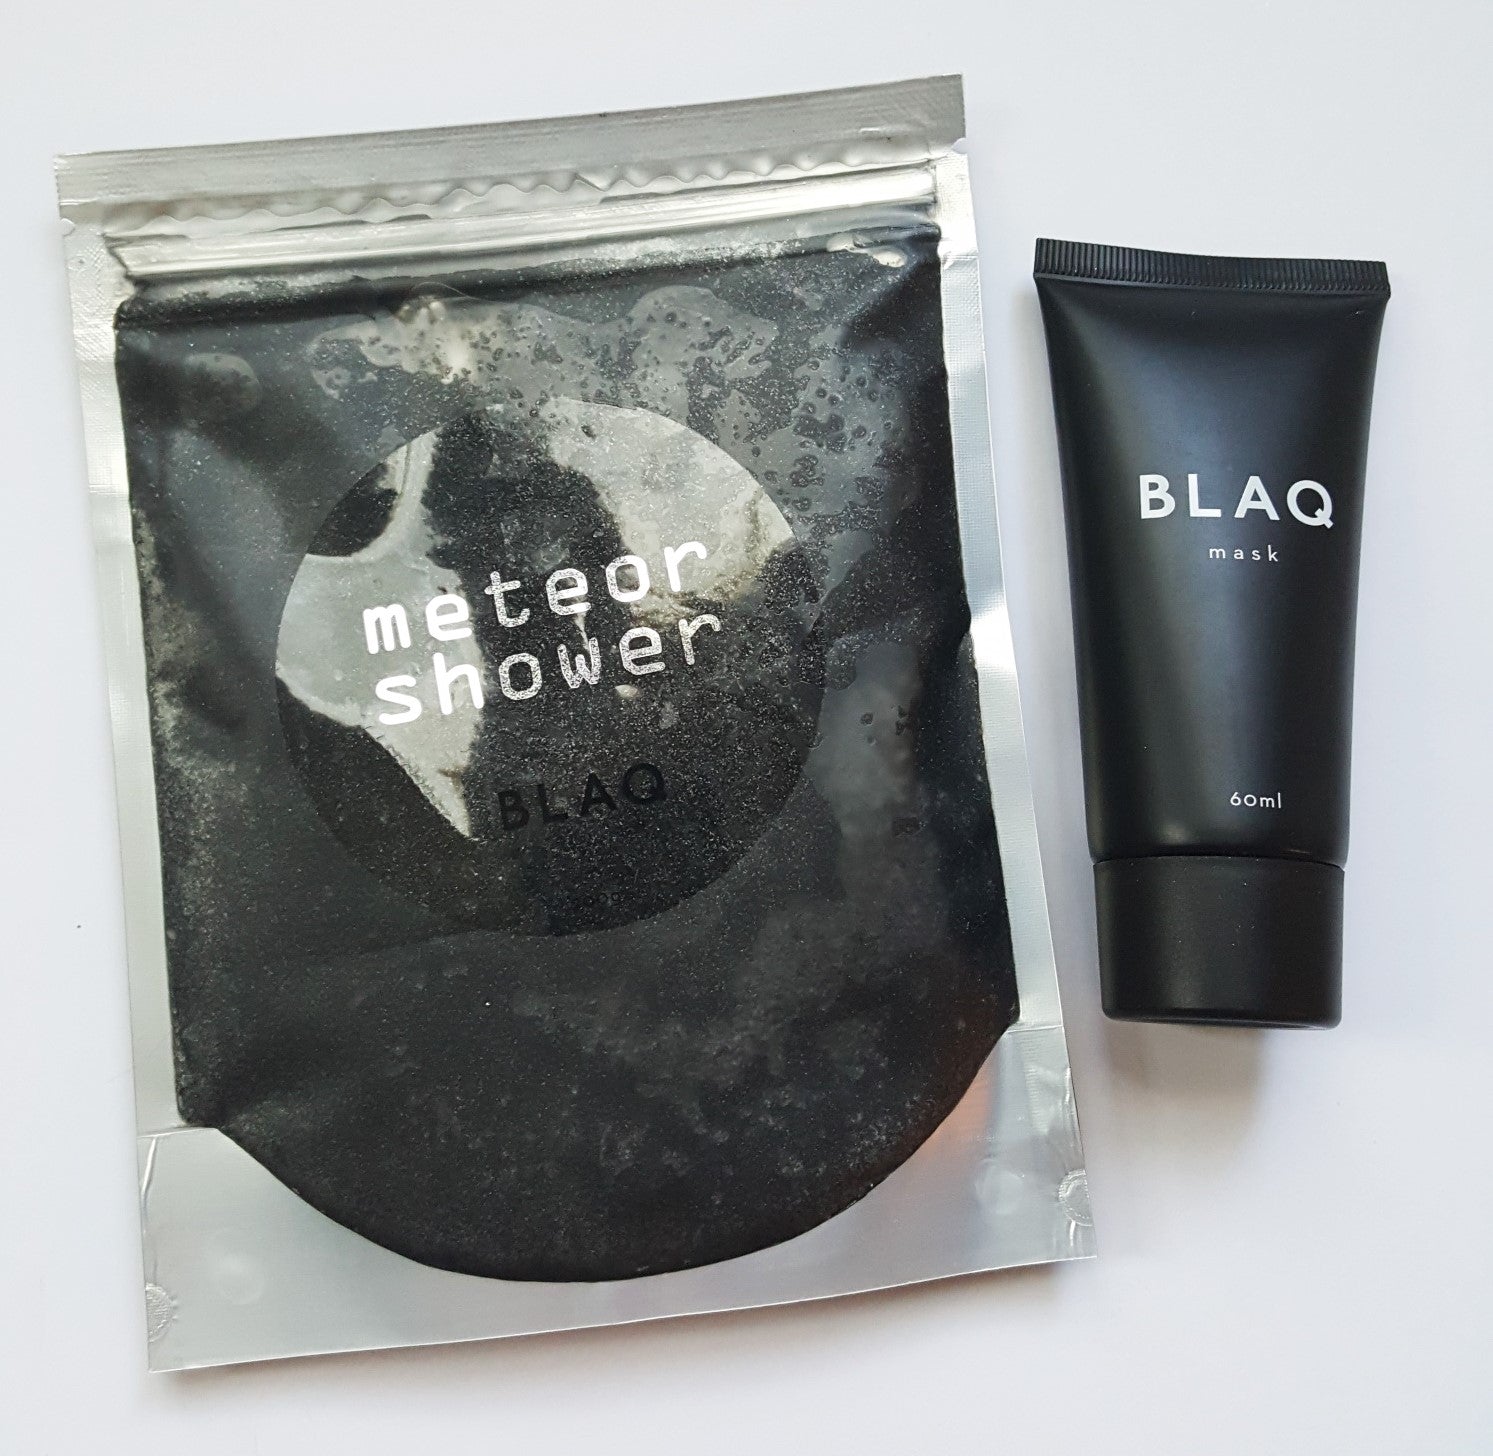 Review, Ingredients, Photos, Skincare Trend 2017, 2018: Blaq Meteor Shower Scrub, Blaq Mask Tube, Activated Charcoal